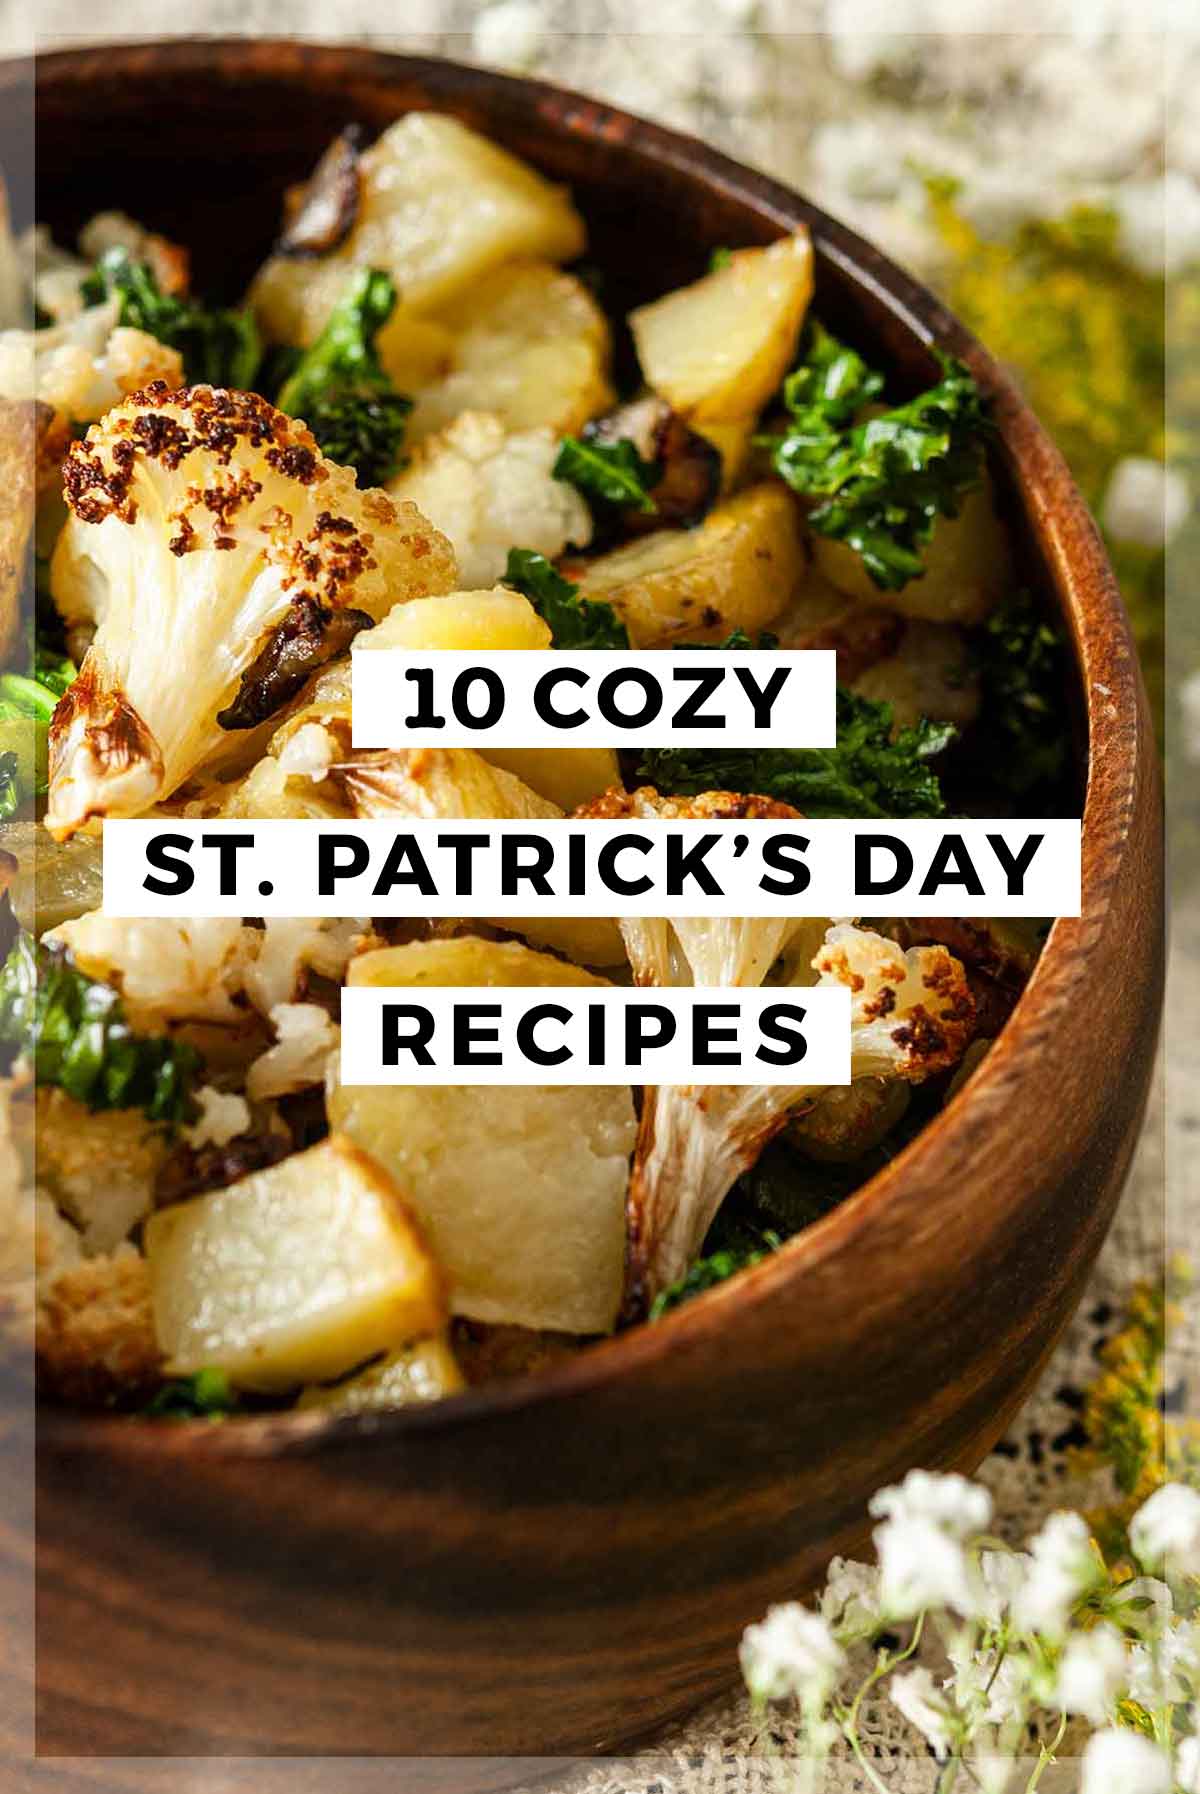 A bowl of potato hash with a title that says "10 Cozy St. Patrick's Day Recipes."